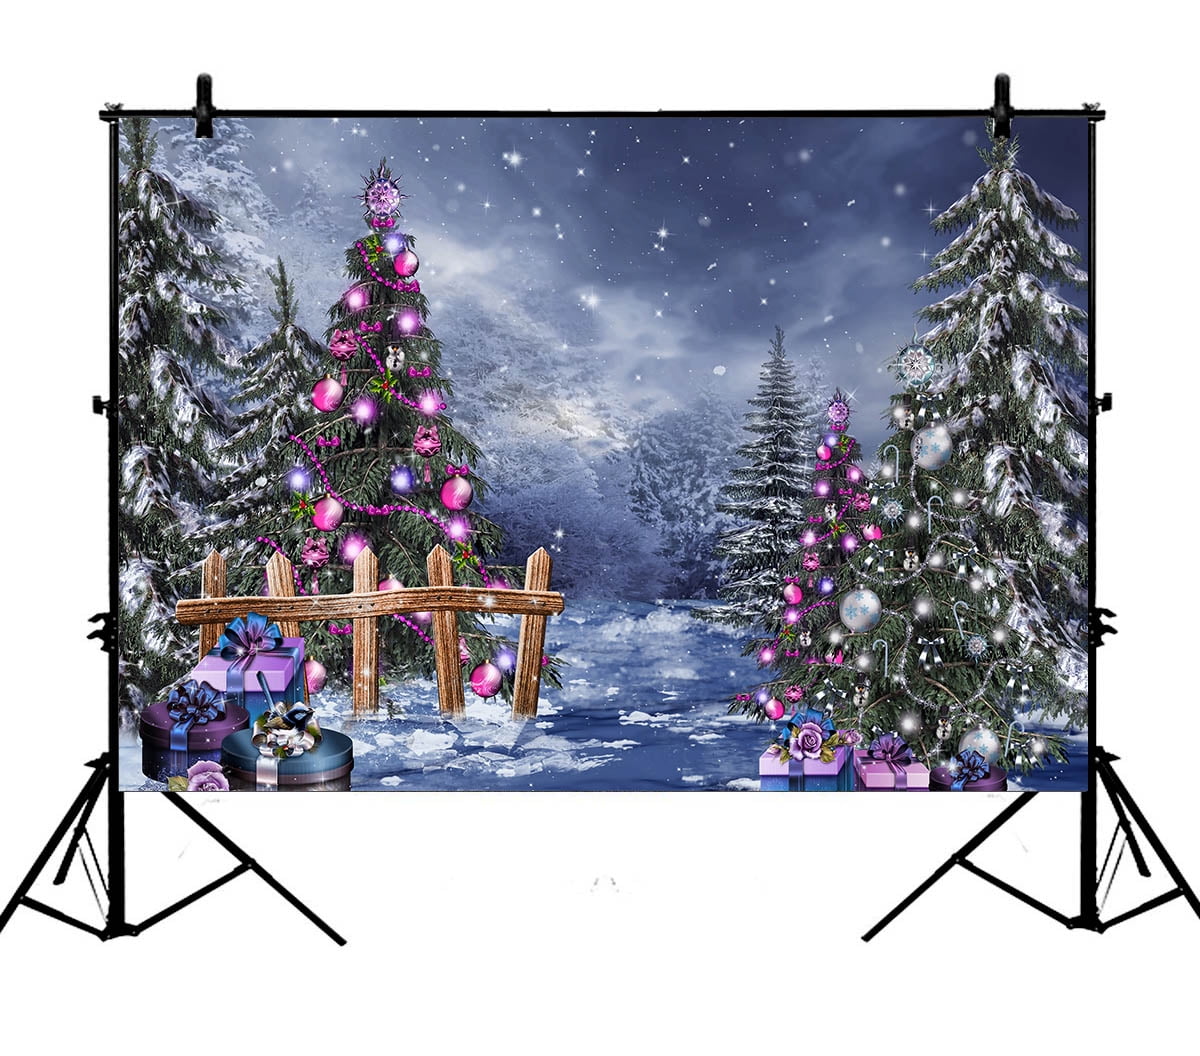 YKCG 7x5ft Christmas Gifts Trees Outdoor Winter Snowy Landscape ...